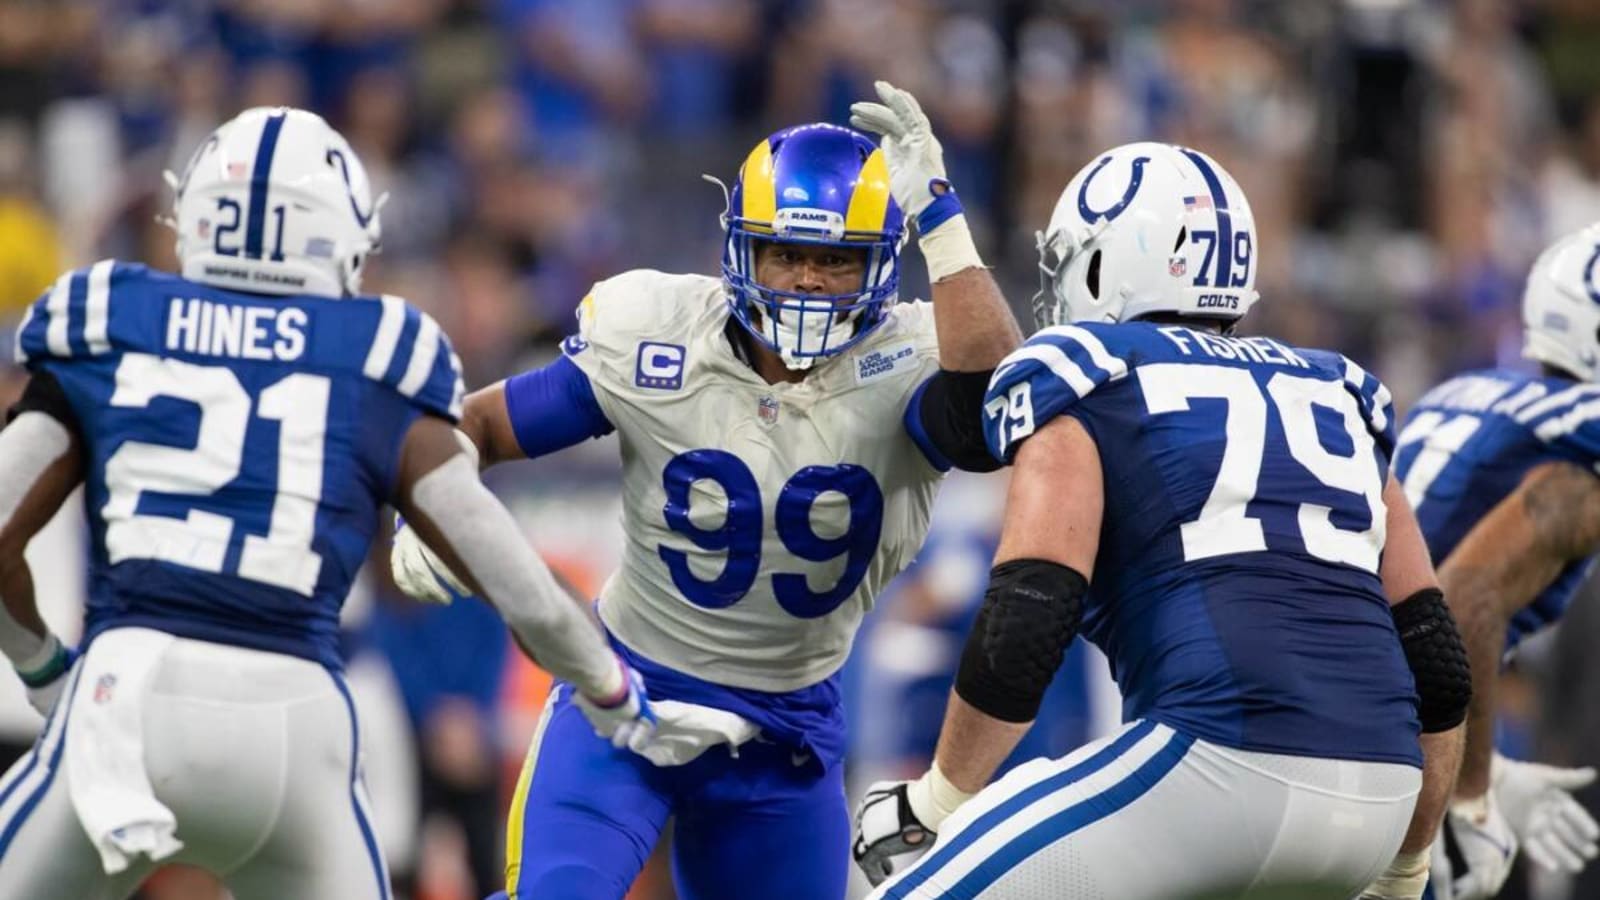 Colts Starting Rookie LT Blake Freeland vs. Aaron Donald: What to Expect